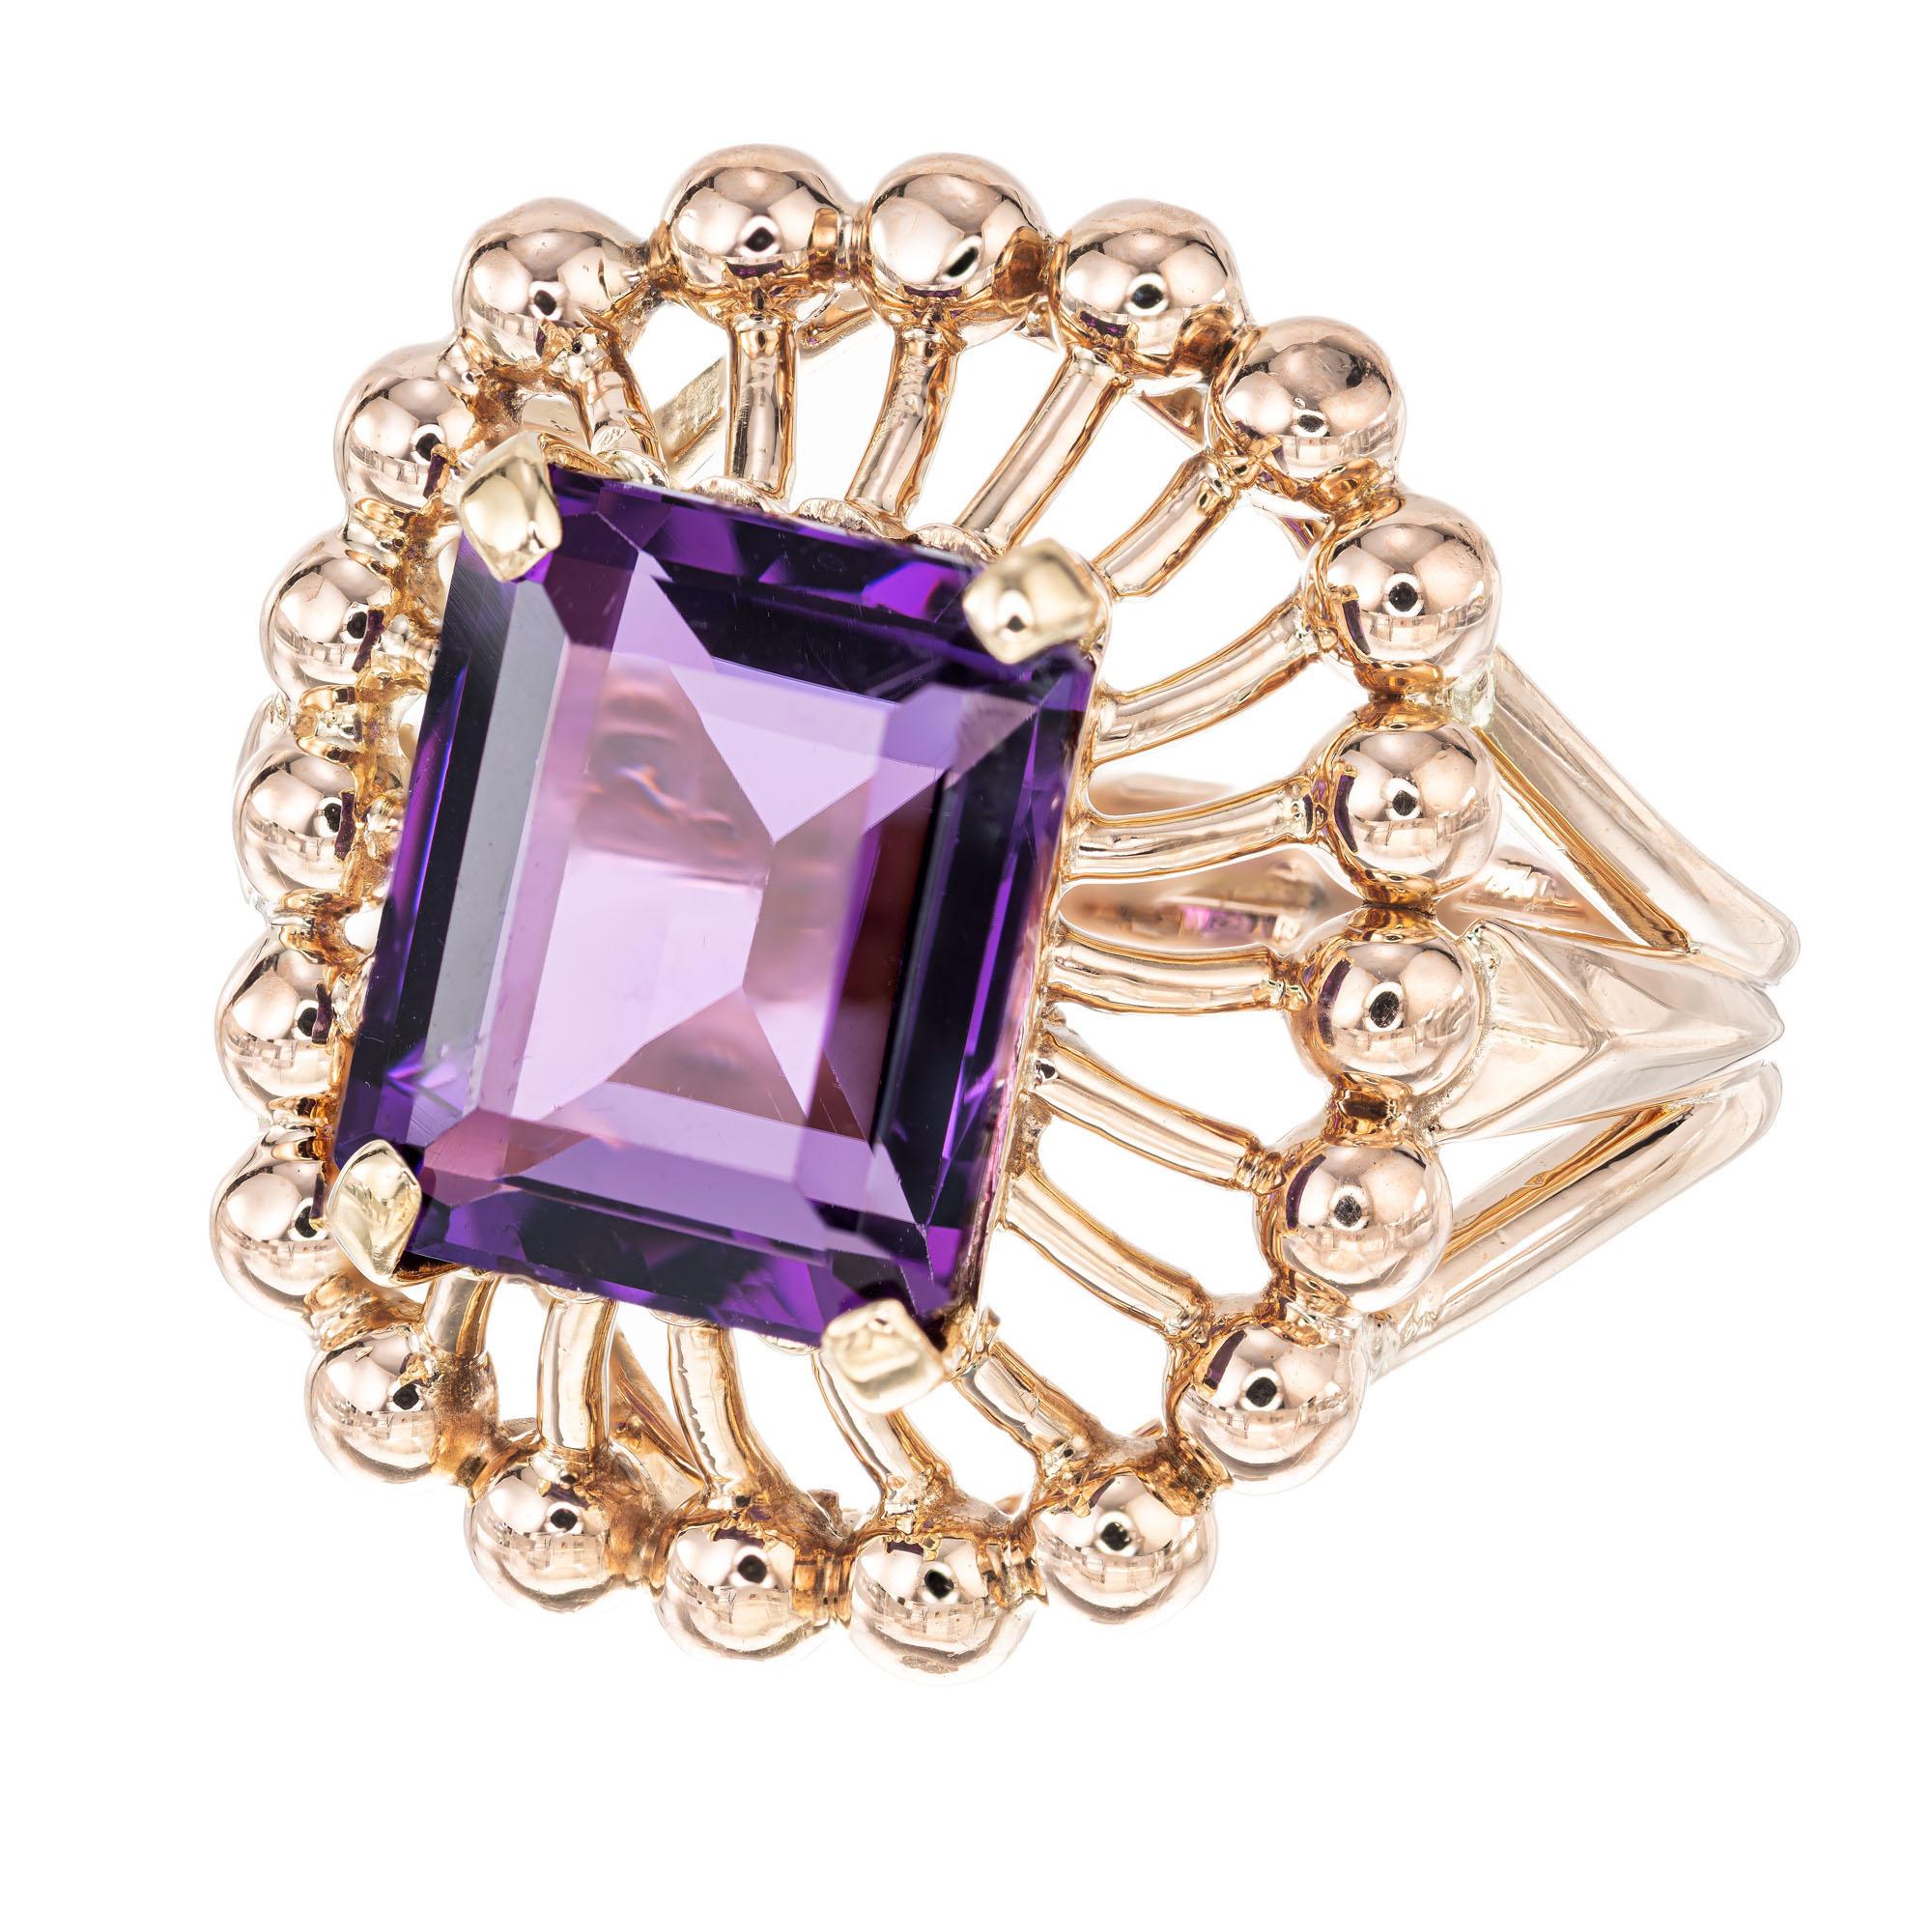 6.50 Carat Emerald Cut Amethyst Rose Gold Ring In Good Condition For Sale In Stamford, CT